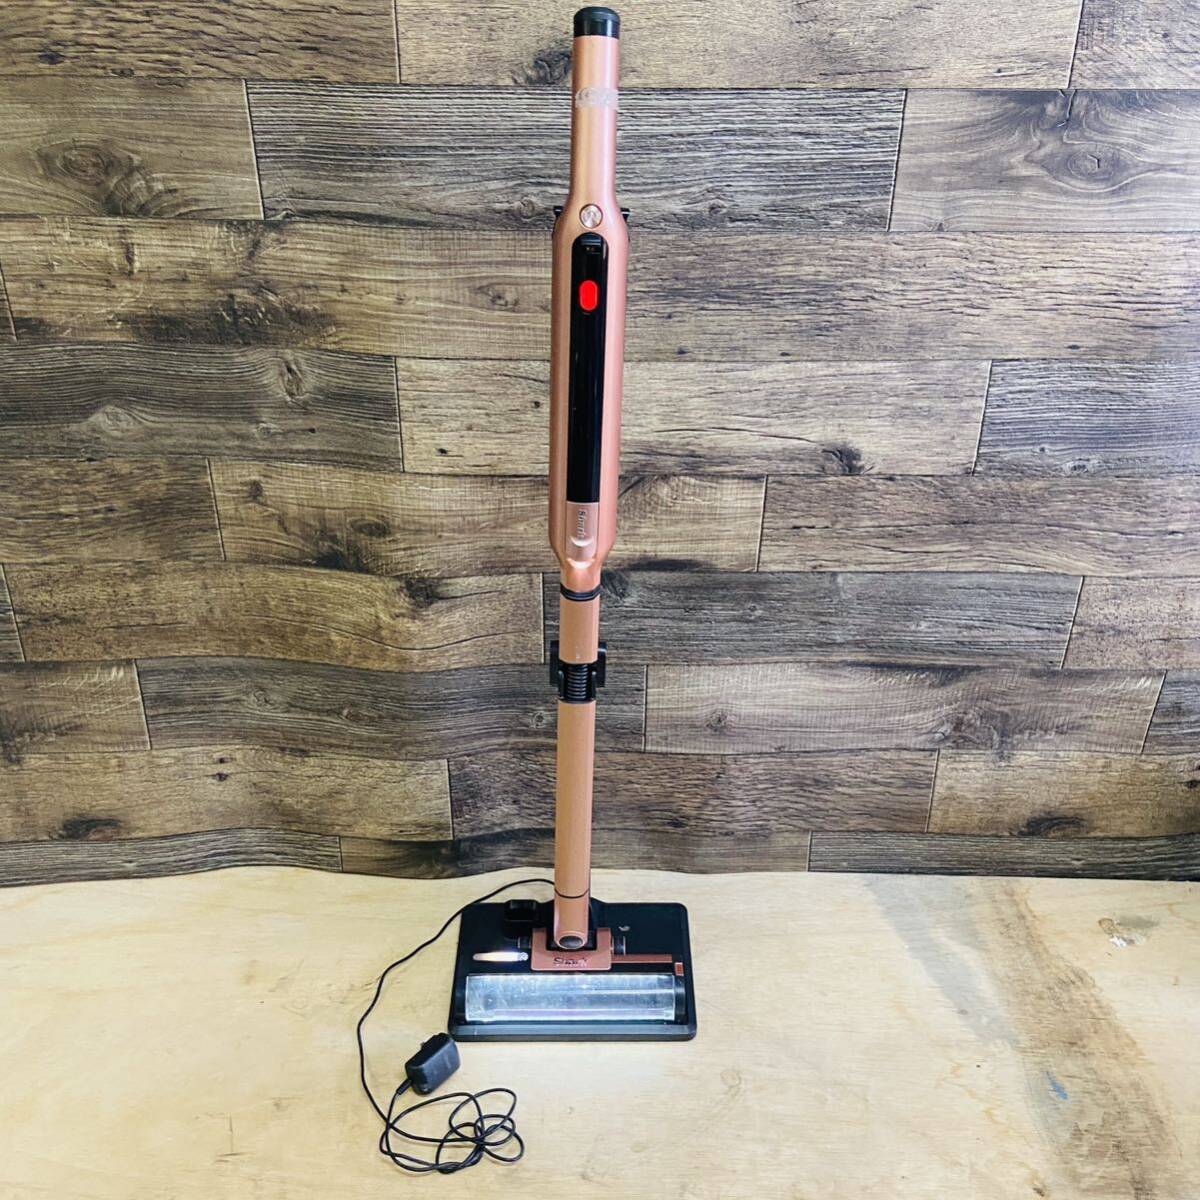 Shark Shark EVOPOWER SYSTEM IQ cordless stick cleaner vacuum cleaner CS851JCP present condition goods power supply has confirmed 